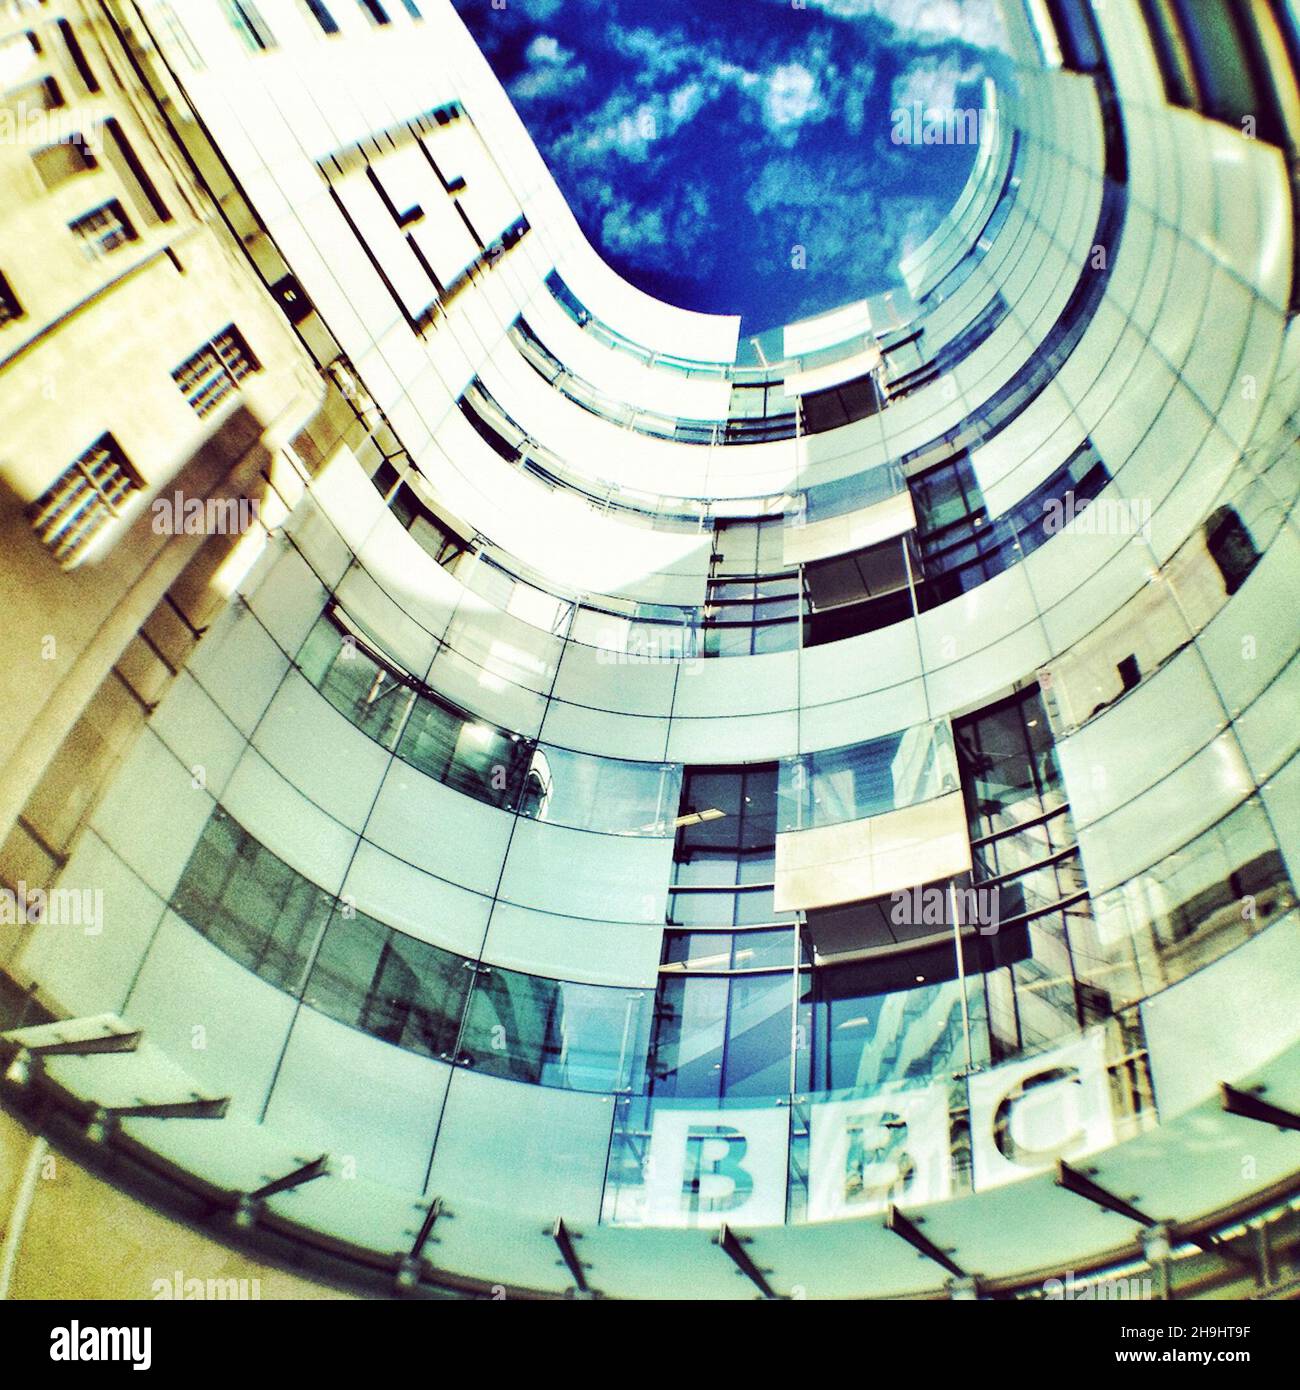 The BBC's Portland House in London (part of a series of experimental images taken and processed on the iPhone) Stock Photo